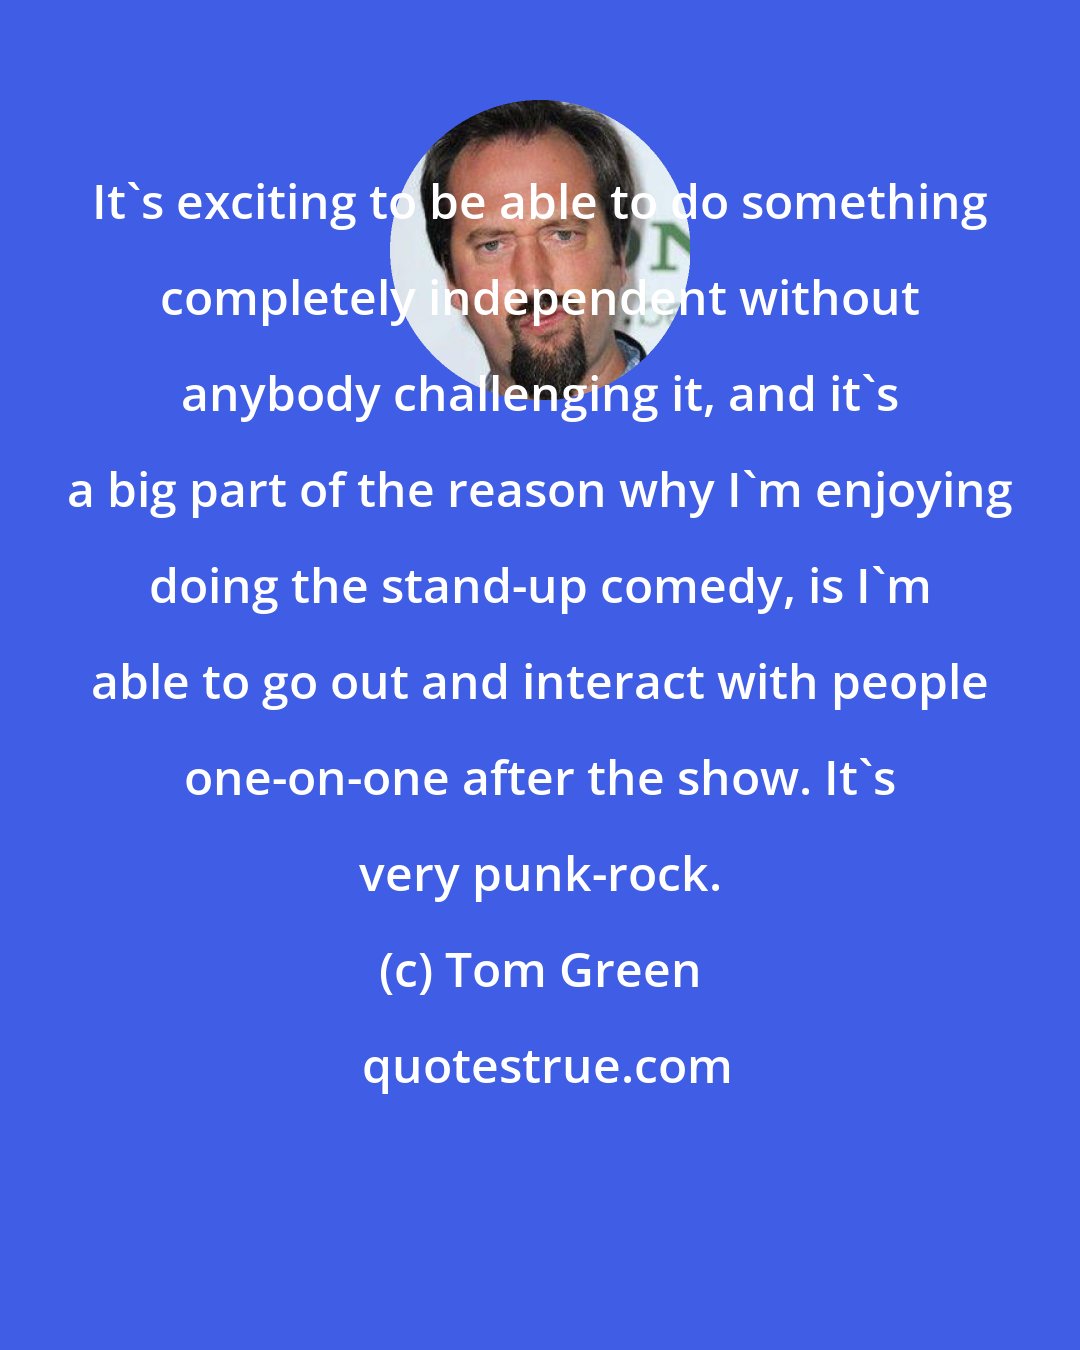 Tom Green: It's exciting to be able to do something completely independent without anybody challenging it, and it's a big part of the reason why I'm enjoying doing the stand-up comedy, is I'm able to go out and interact with people one-on-one after the show. It's very punk-rock.